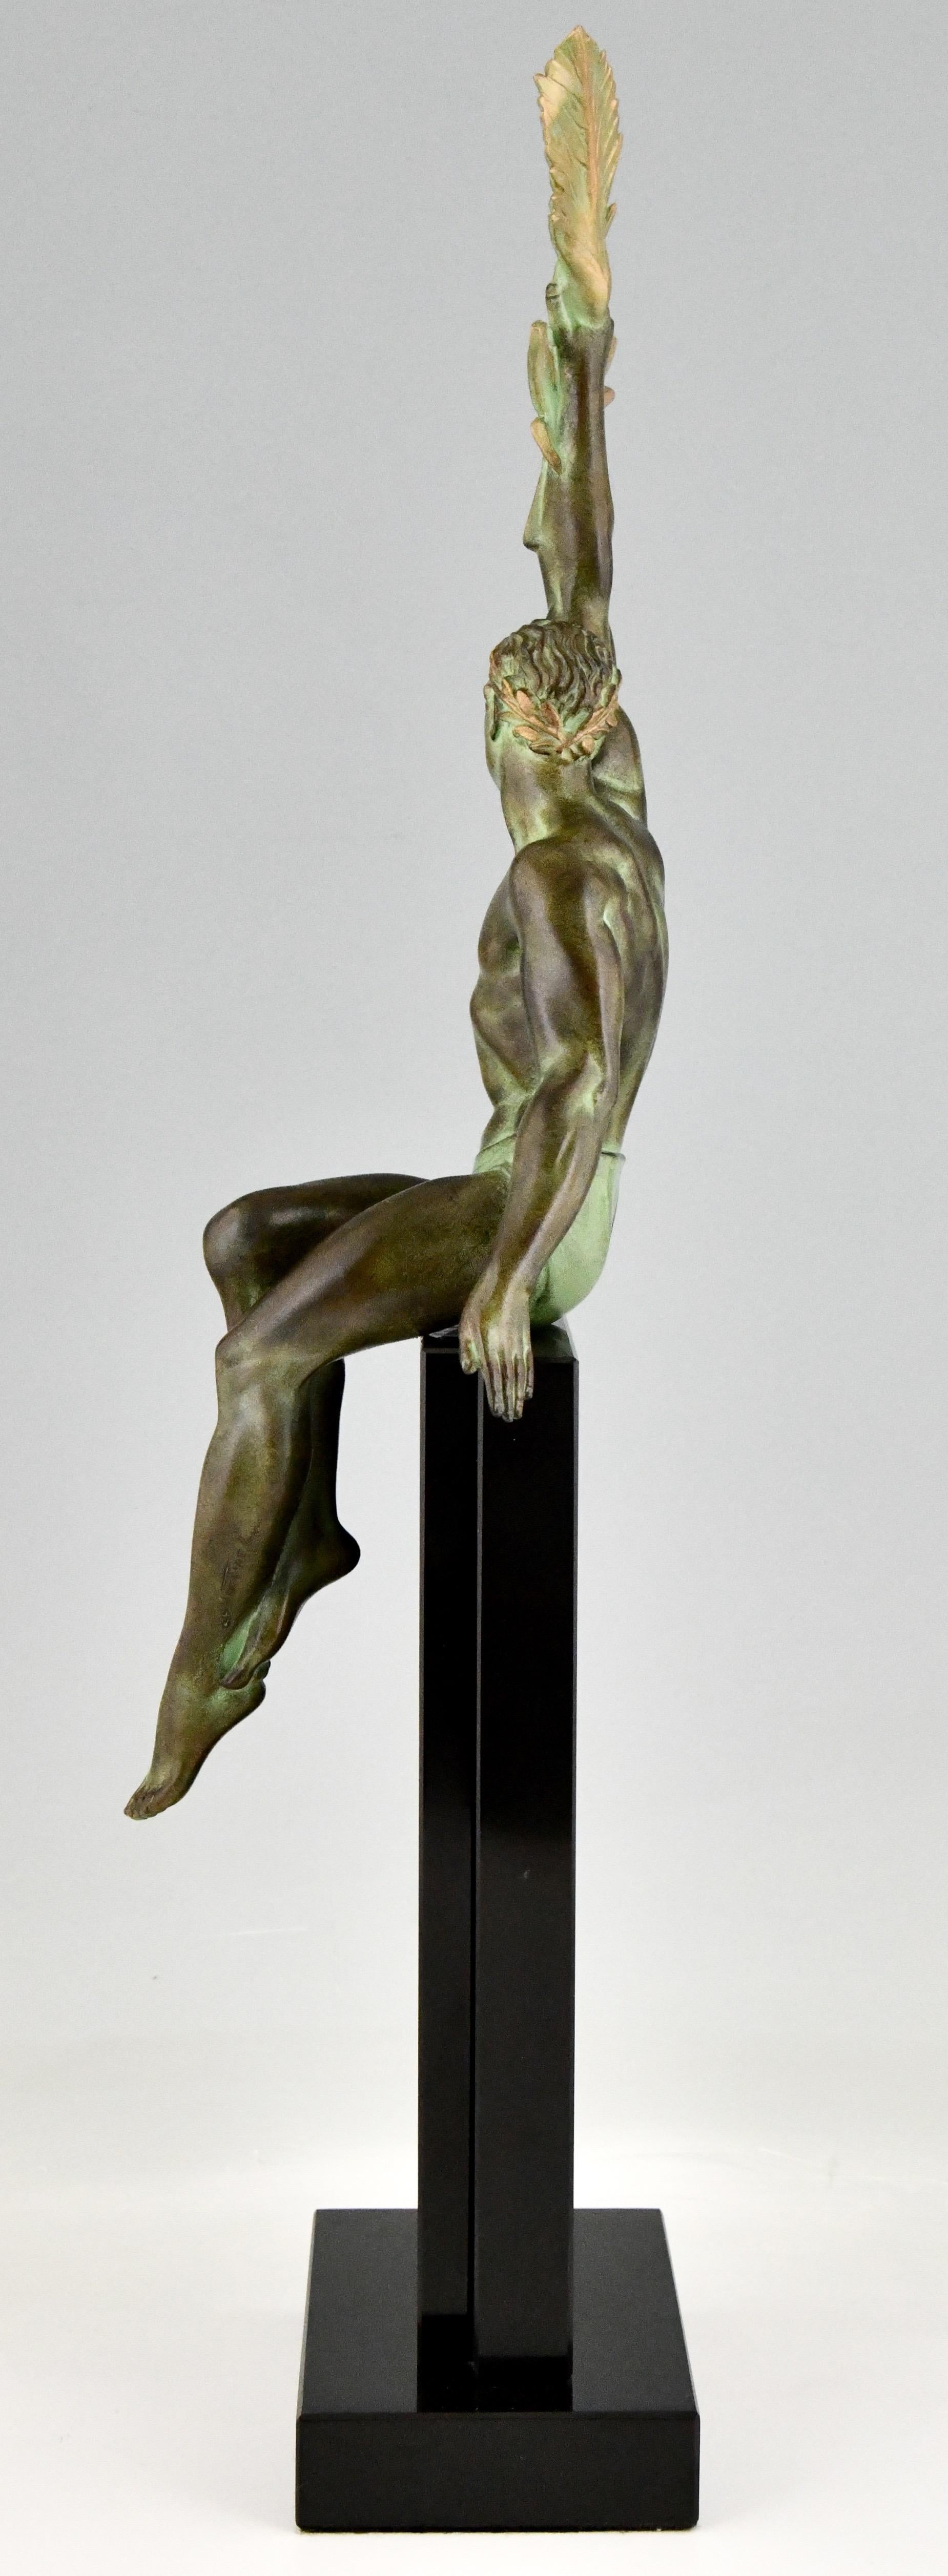 Marble Art Deco Style Sculpture Athlete with Palm Leaf by Max Le Verrier, Victory